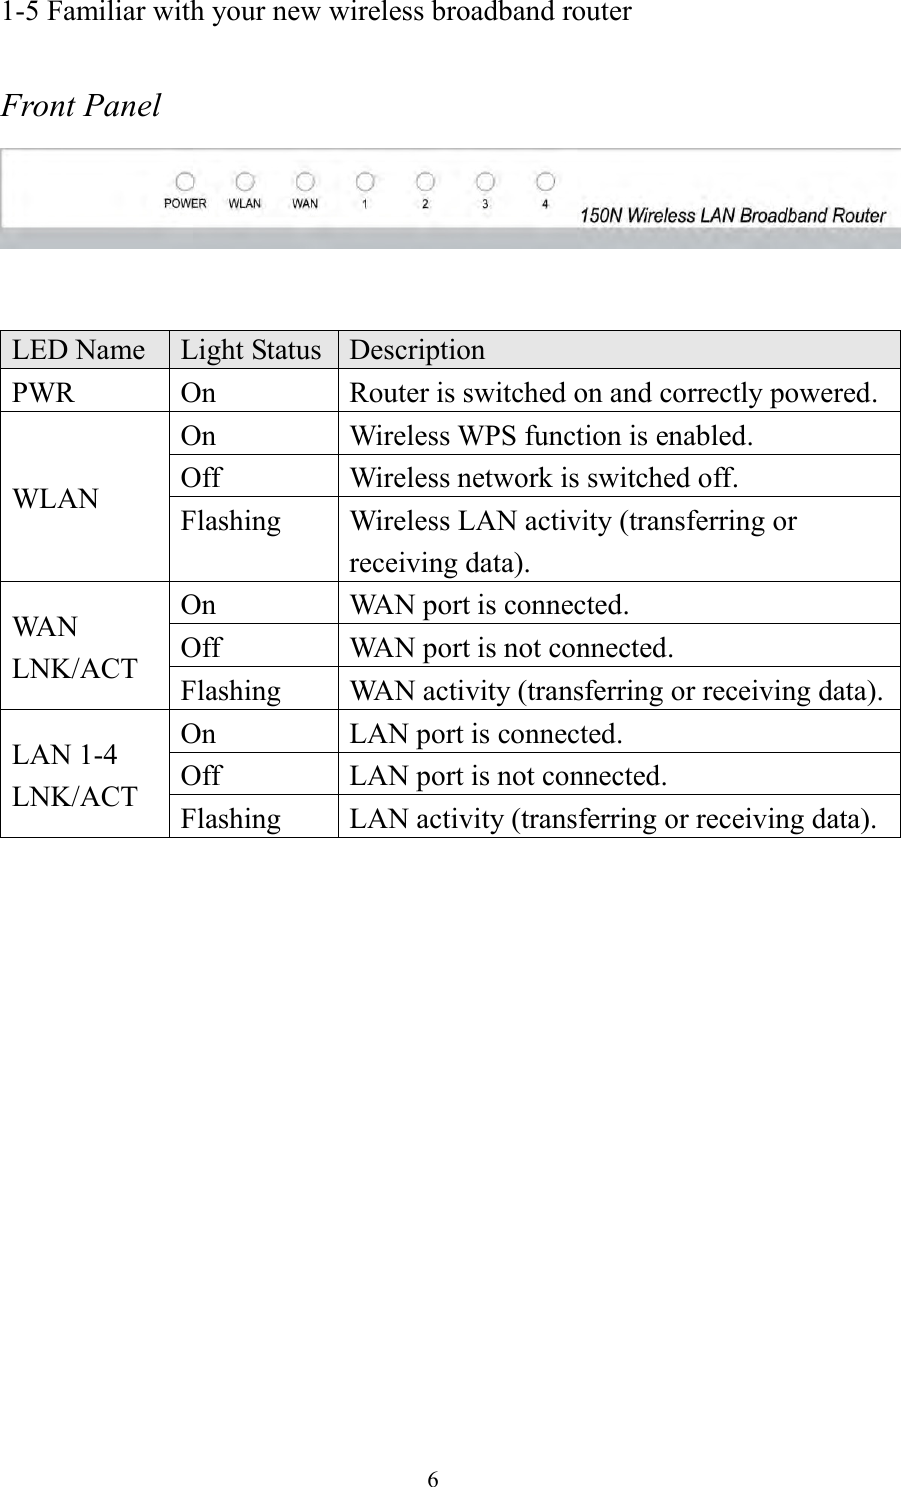  6 1-5 Familiar with your new wireless broadband router  Front Panel    LED Name Light Status Description PWR On Router is switched on and correctly powered. WLAN On Wireless WPS function is enabled. Off Wireless network is switched off. Flashing Wireless LAN activity (transferring or receiving data). WAN LNK/ACT On WAN port is connected. Off WAN port is not connected. Flashing WAN activity (transferring or receiving data). LAN 1-4 LNK/ACT On LAN port is connected. Off LAN port is not connected. Flashing LAN activity (transferring or receiving data).  